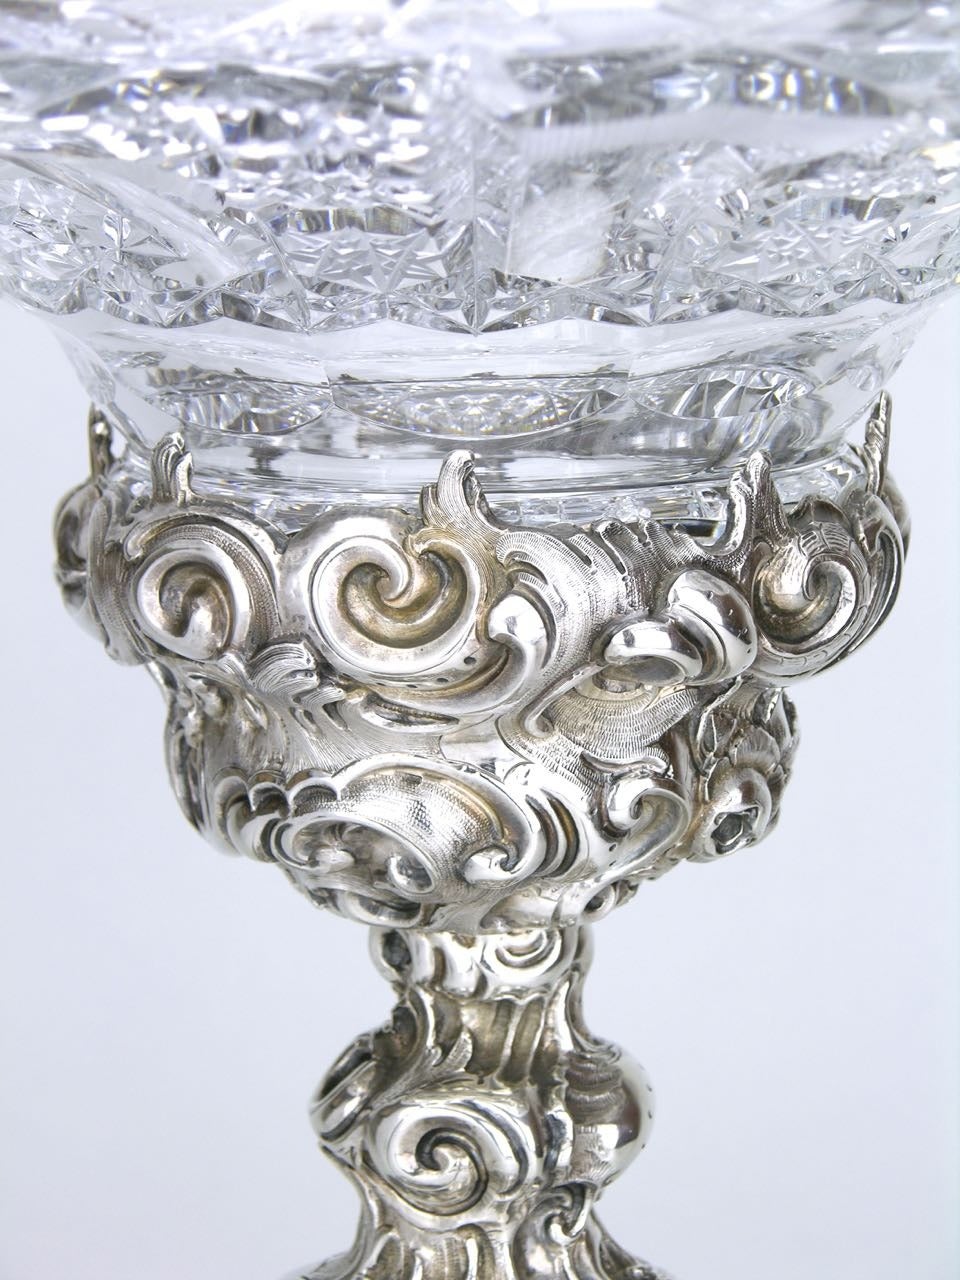 A solid silver and crystal centerpiece of an impressive scale comprised of a hand raised, heavily chased solid silver base in the Rococo Revival style (hallmarked for Vienna 13 loth (813 purity) and for 1836) with a later hand-cut heavy crystal